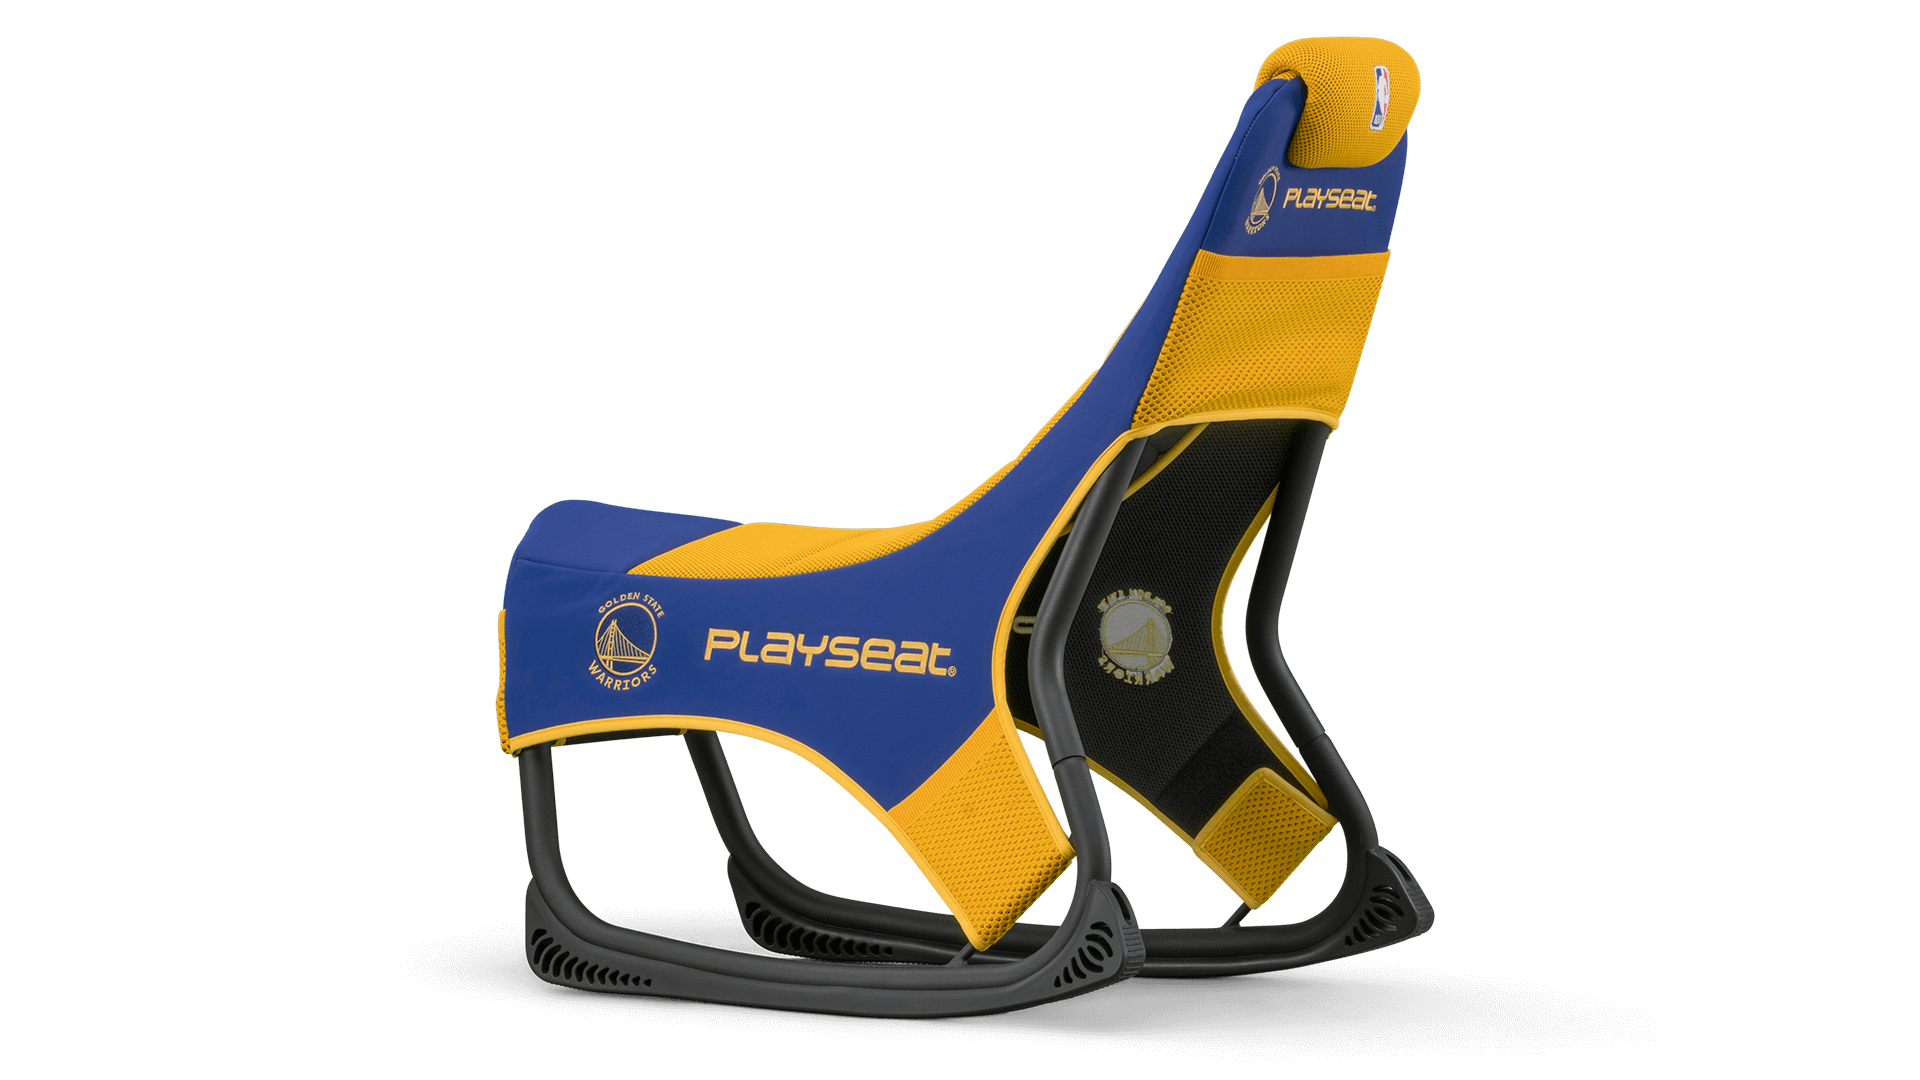 playseat-go-nba-golden-state-warriors-gaming-seat-back-angle-view-1920x1080.png